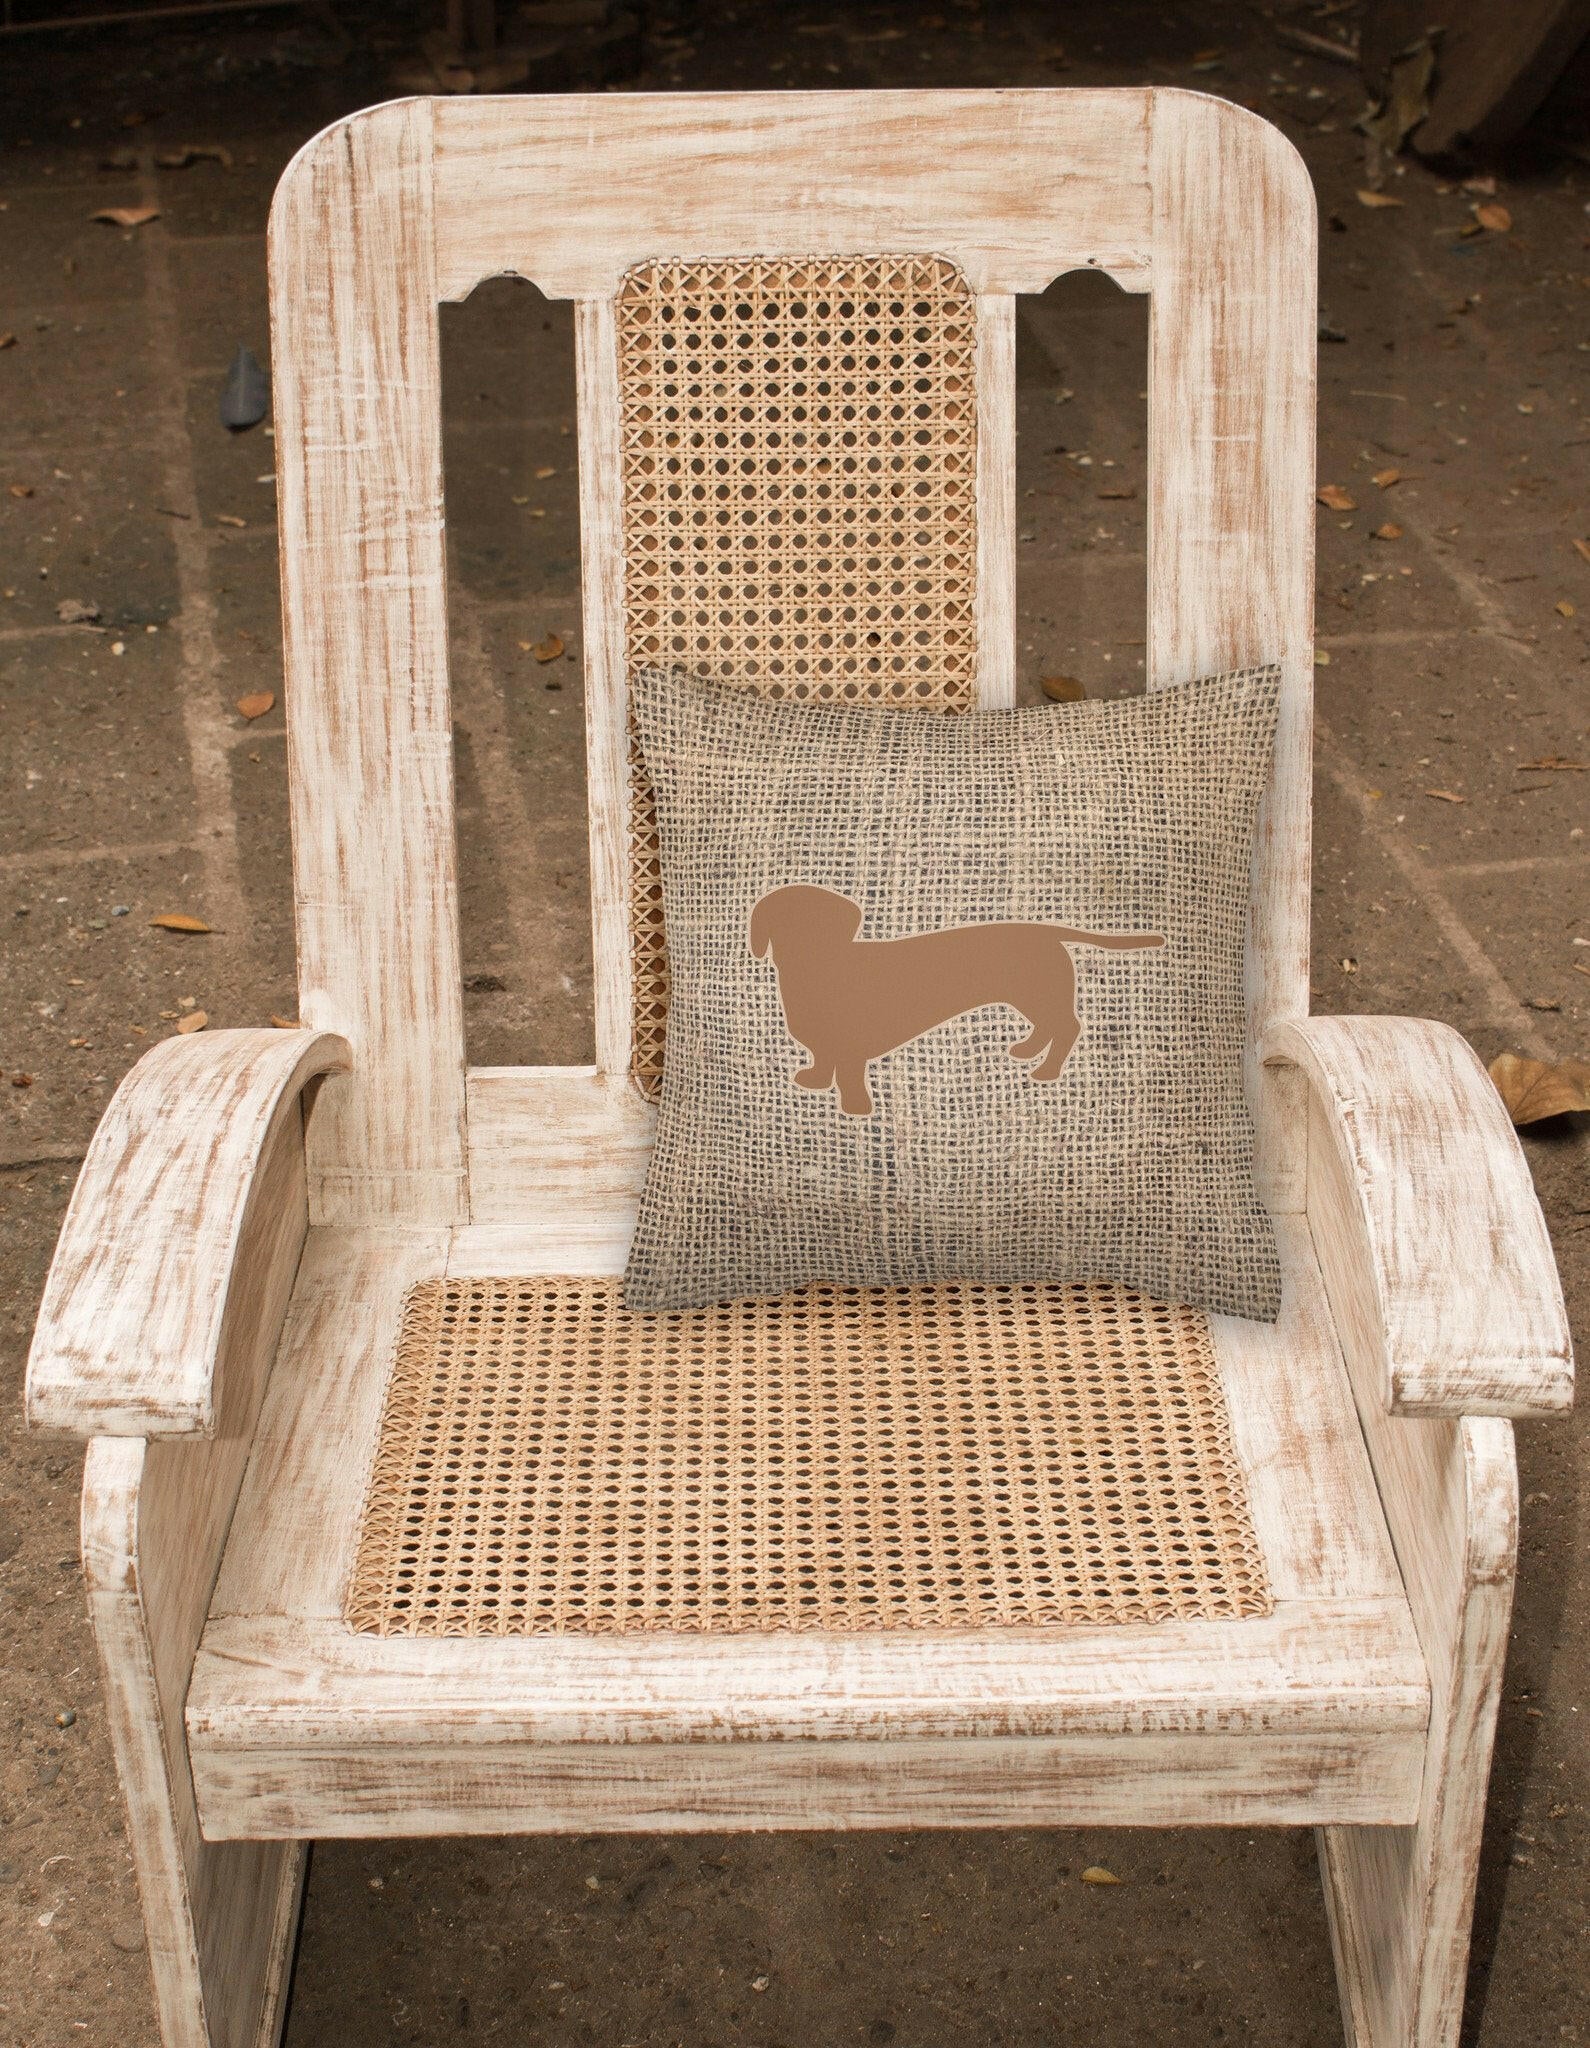 Dachshund Burlap and Brown   Canvas Fabric Decorative Pillow BB1088 - the-store.com